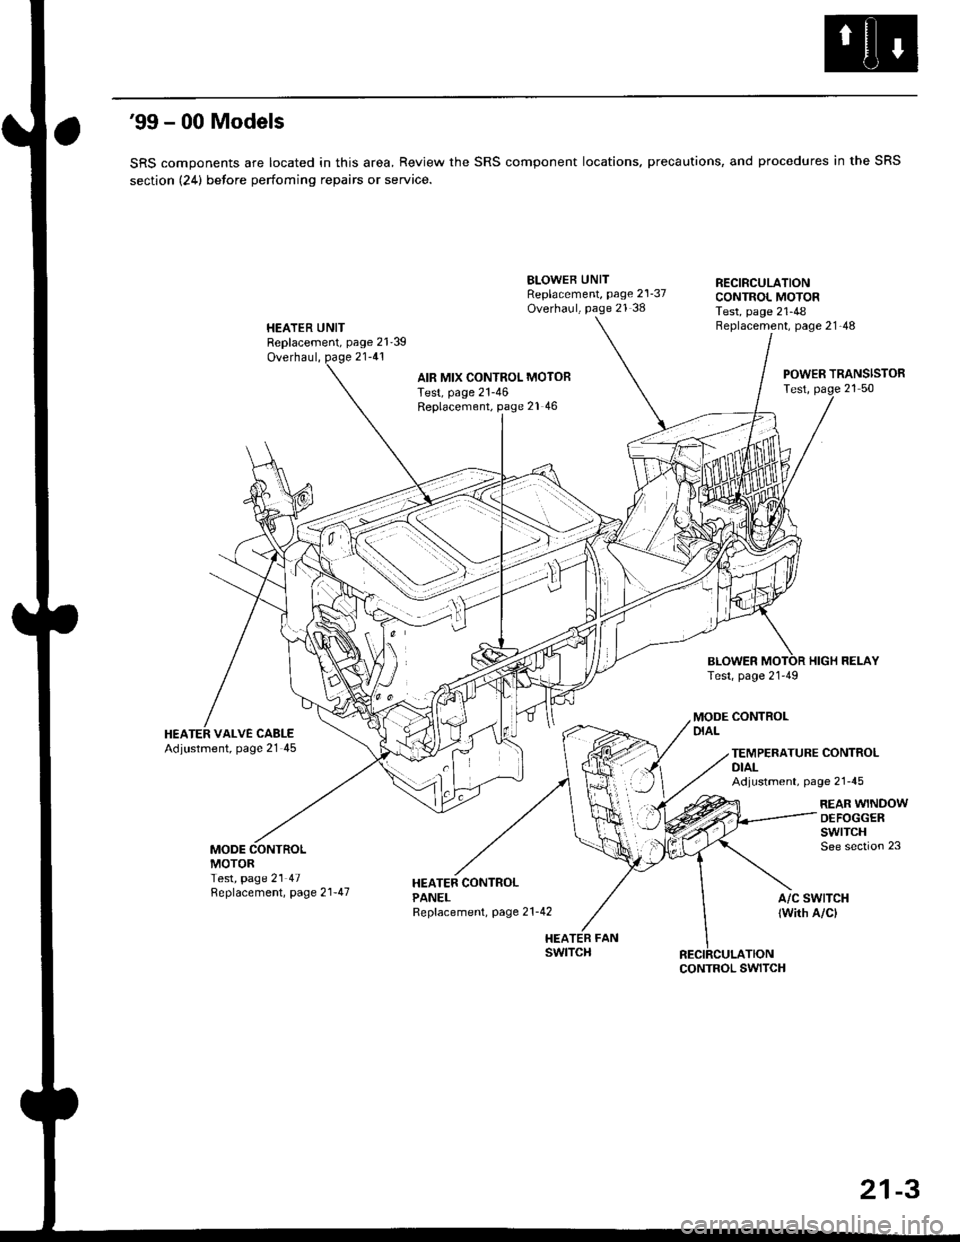 HONDA CIVIC 1997 6.G Workshop Manual 99 - 00 Models
SRS components are located in this area, Review the SRS component locations, precautions, and procedures in the SRS
section (24) betore perfoming repairs or service.
HEATER UNITReplace